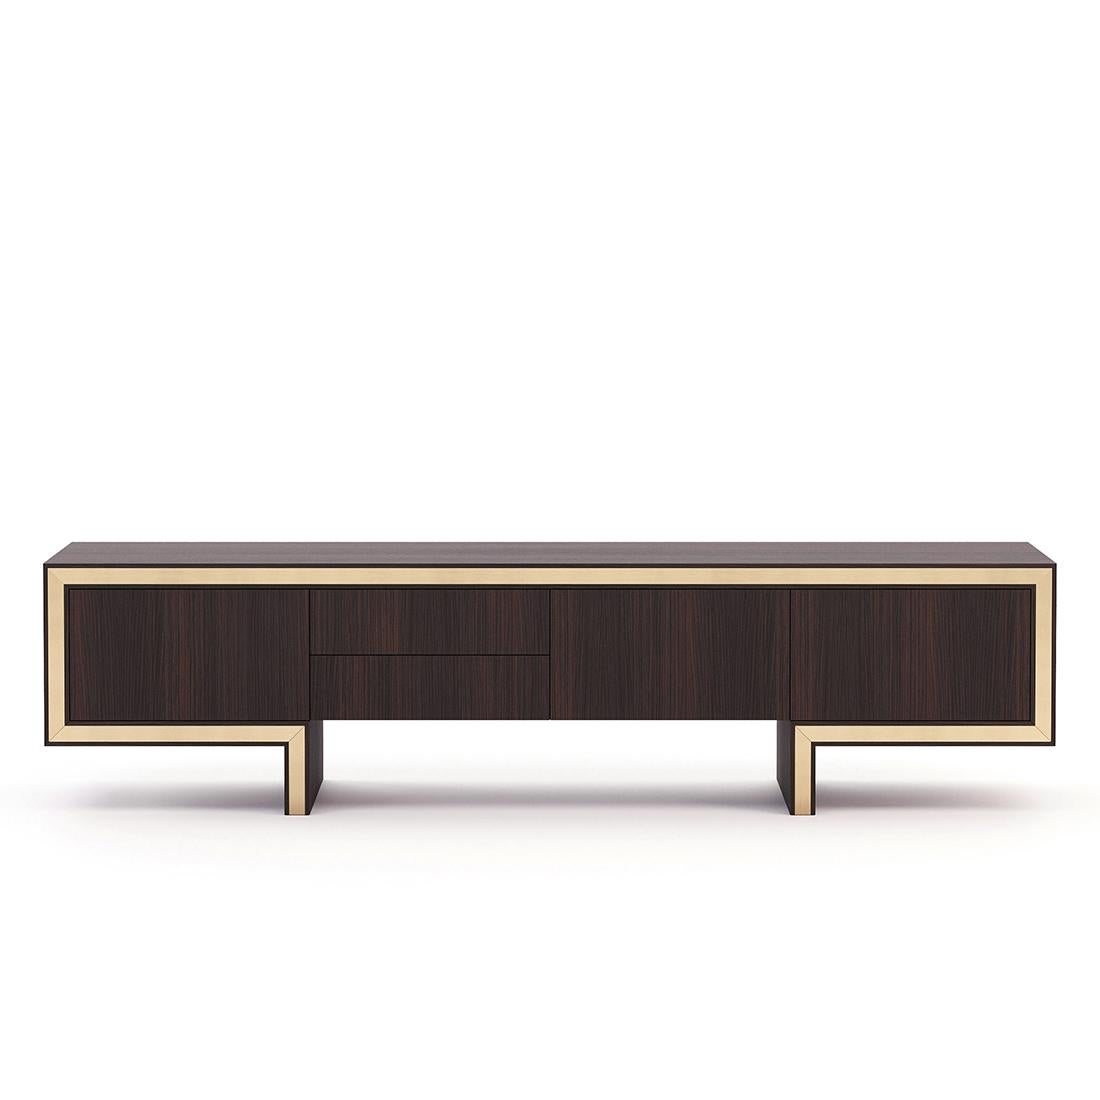 Sideboard Andora TV with structure in smocked eucalyptus veneered
wood in matte finish, with polished stainless steel trim in gold finish.
With 3 doors and 2 drawers with easy glide system.
Also available in ebony matte finish, or grey oak matte